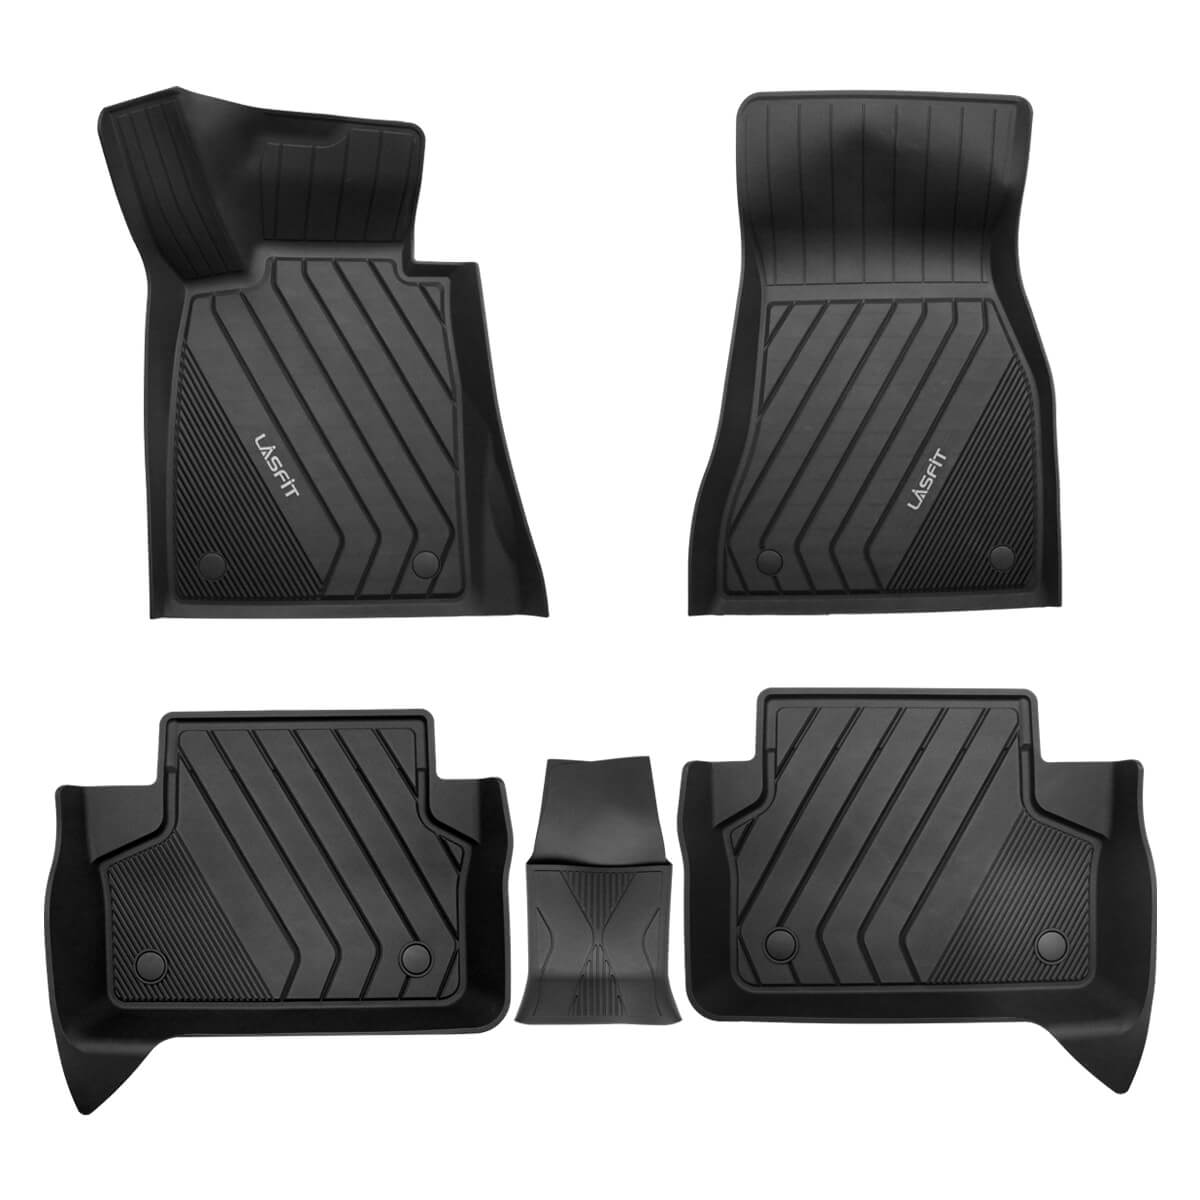 Lasfit Floor Mats for 2017 2018 2019 BMW 5 Series, All Weather Fit TPE Floor Liners Set, 1st and 2nd Row, Black